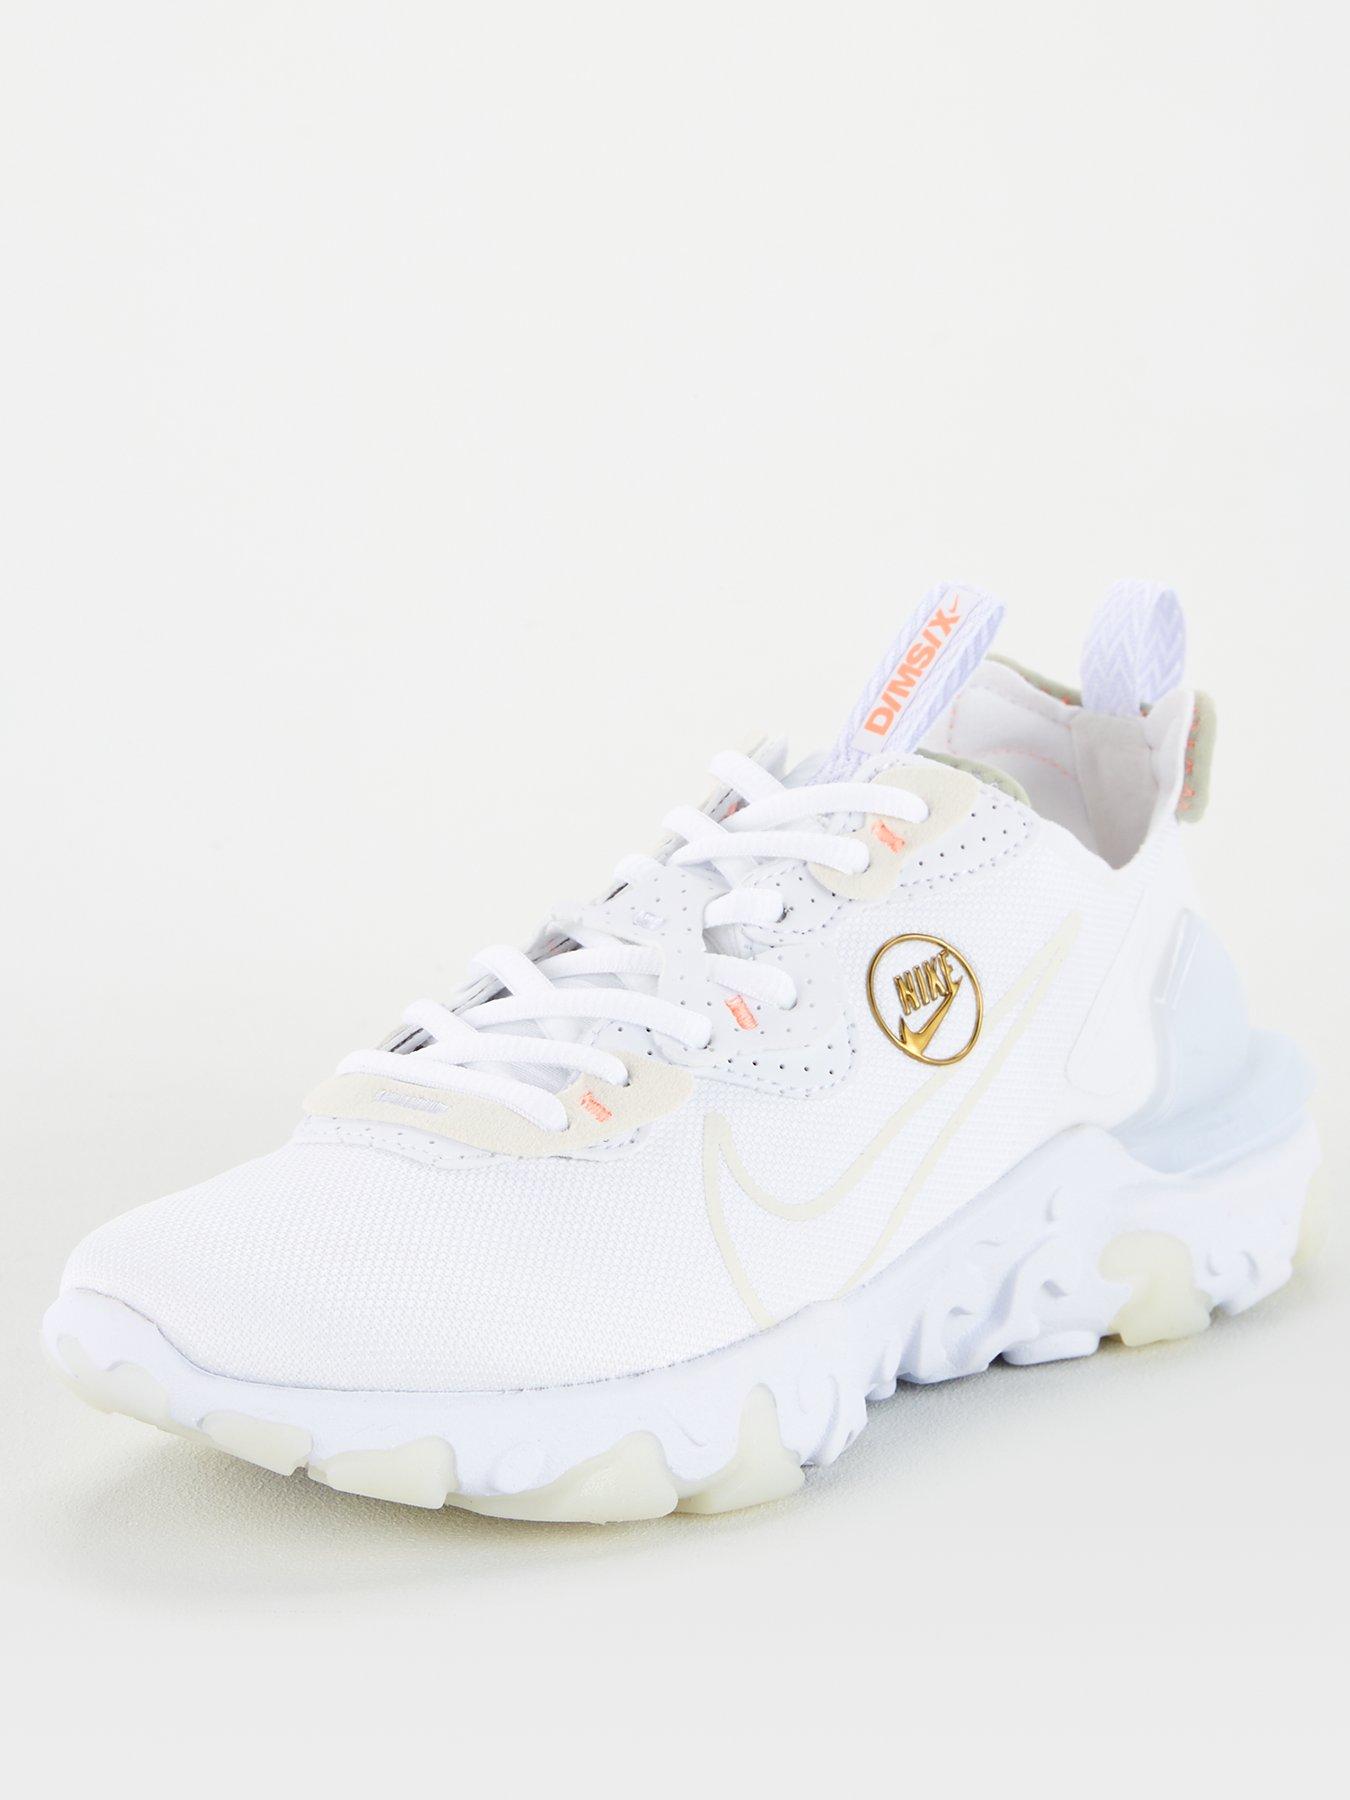 nike react vision trainers in premium white